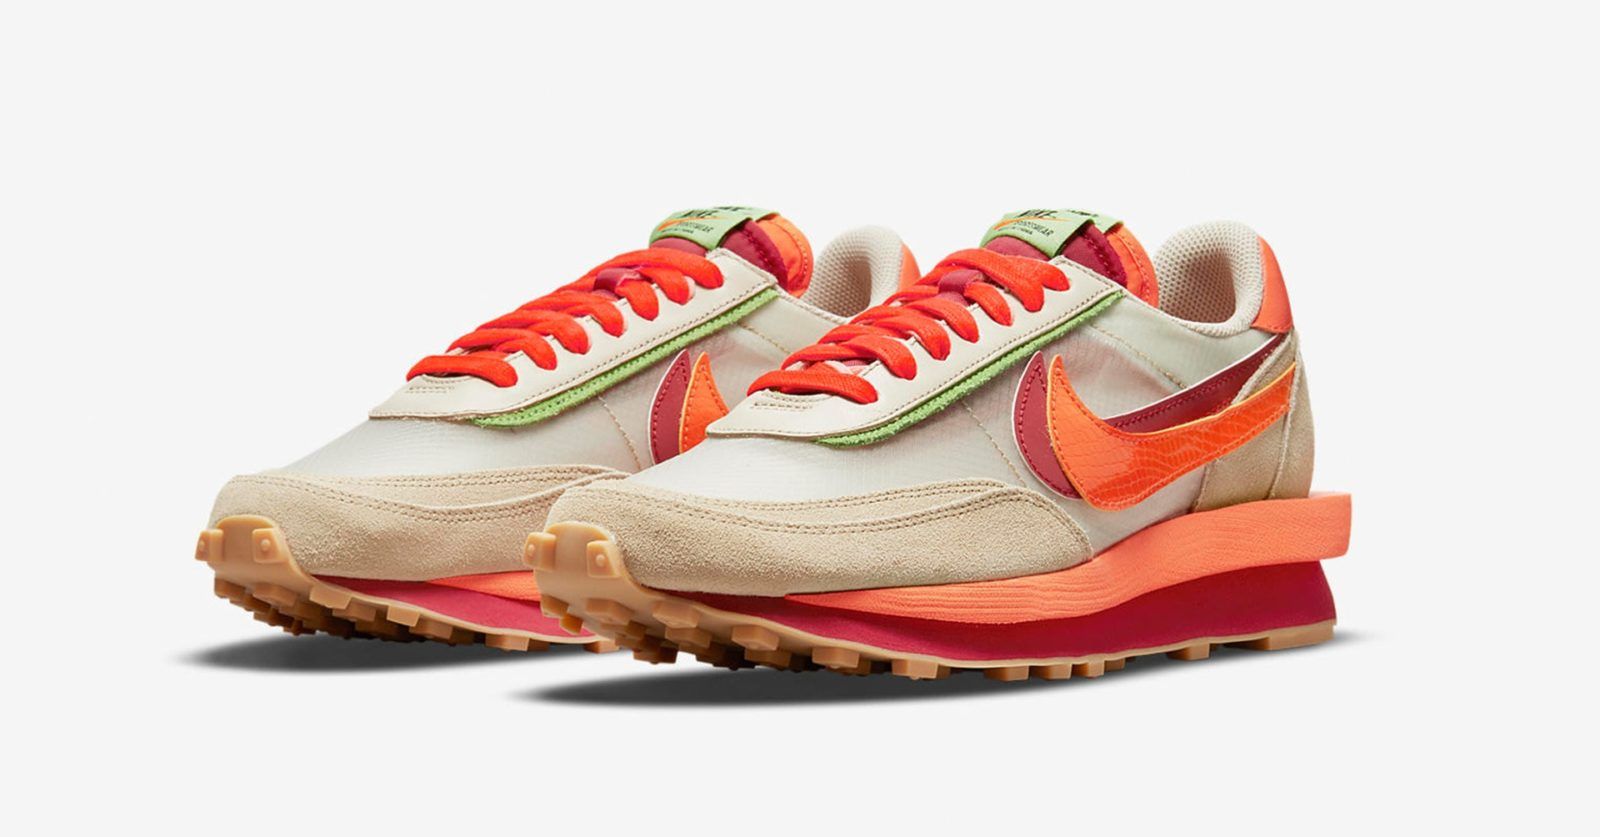 5 sacai x nike waffle daybreak new sneakers to cop this week, including the Sacai x Clot LDWaffle